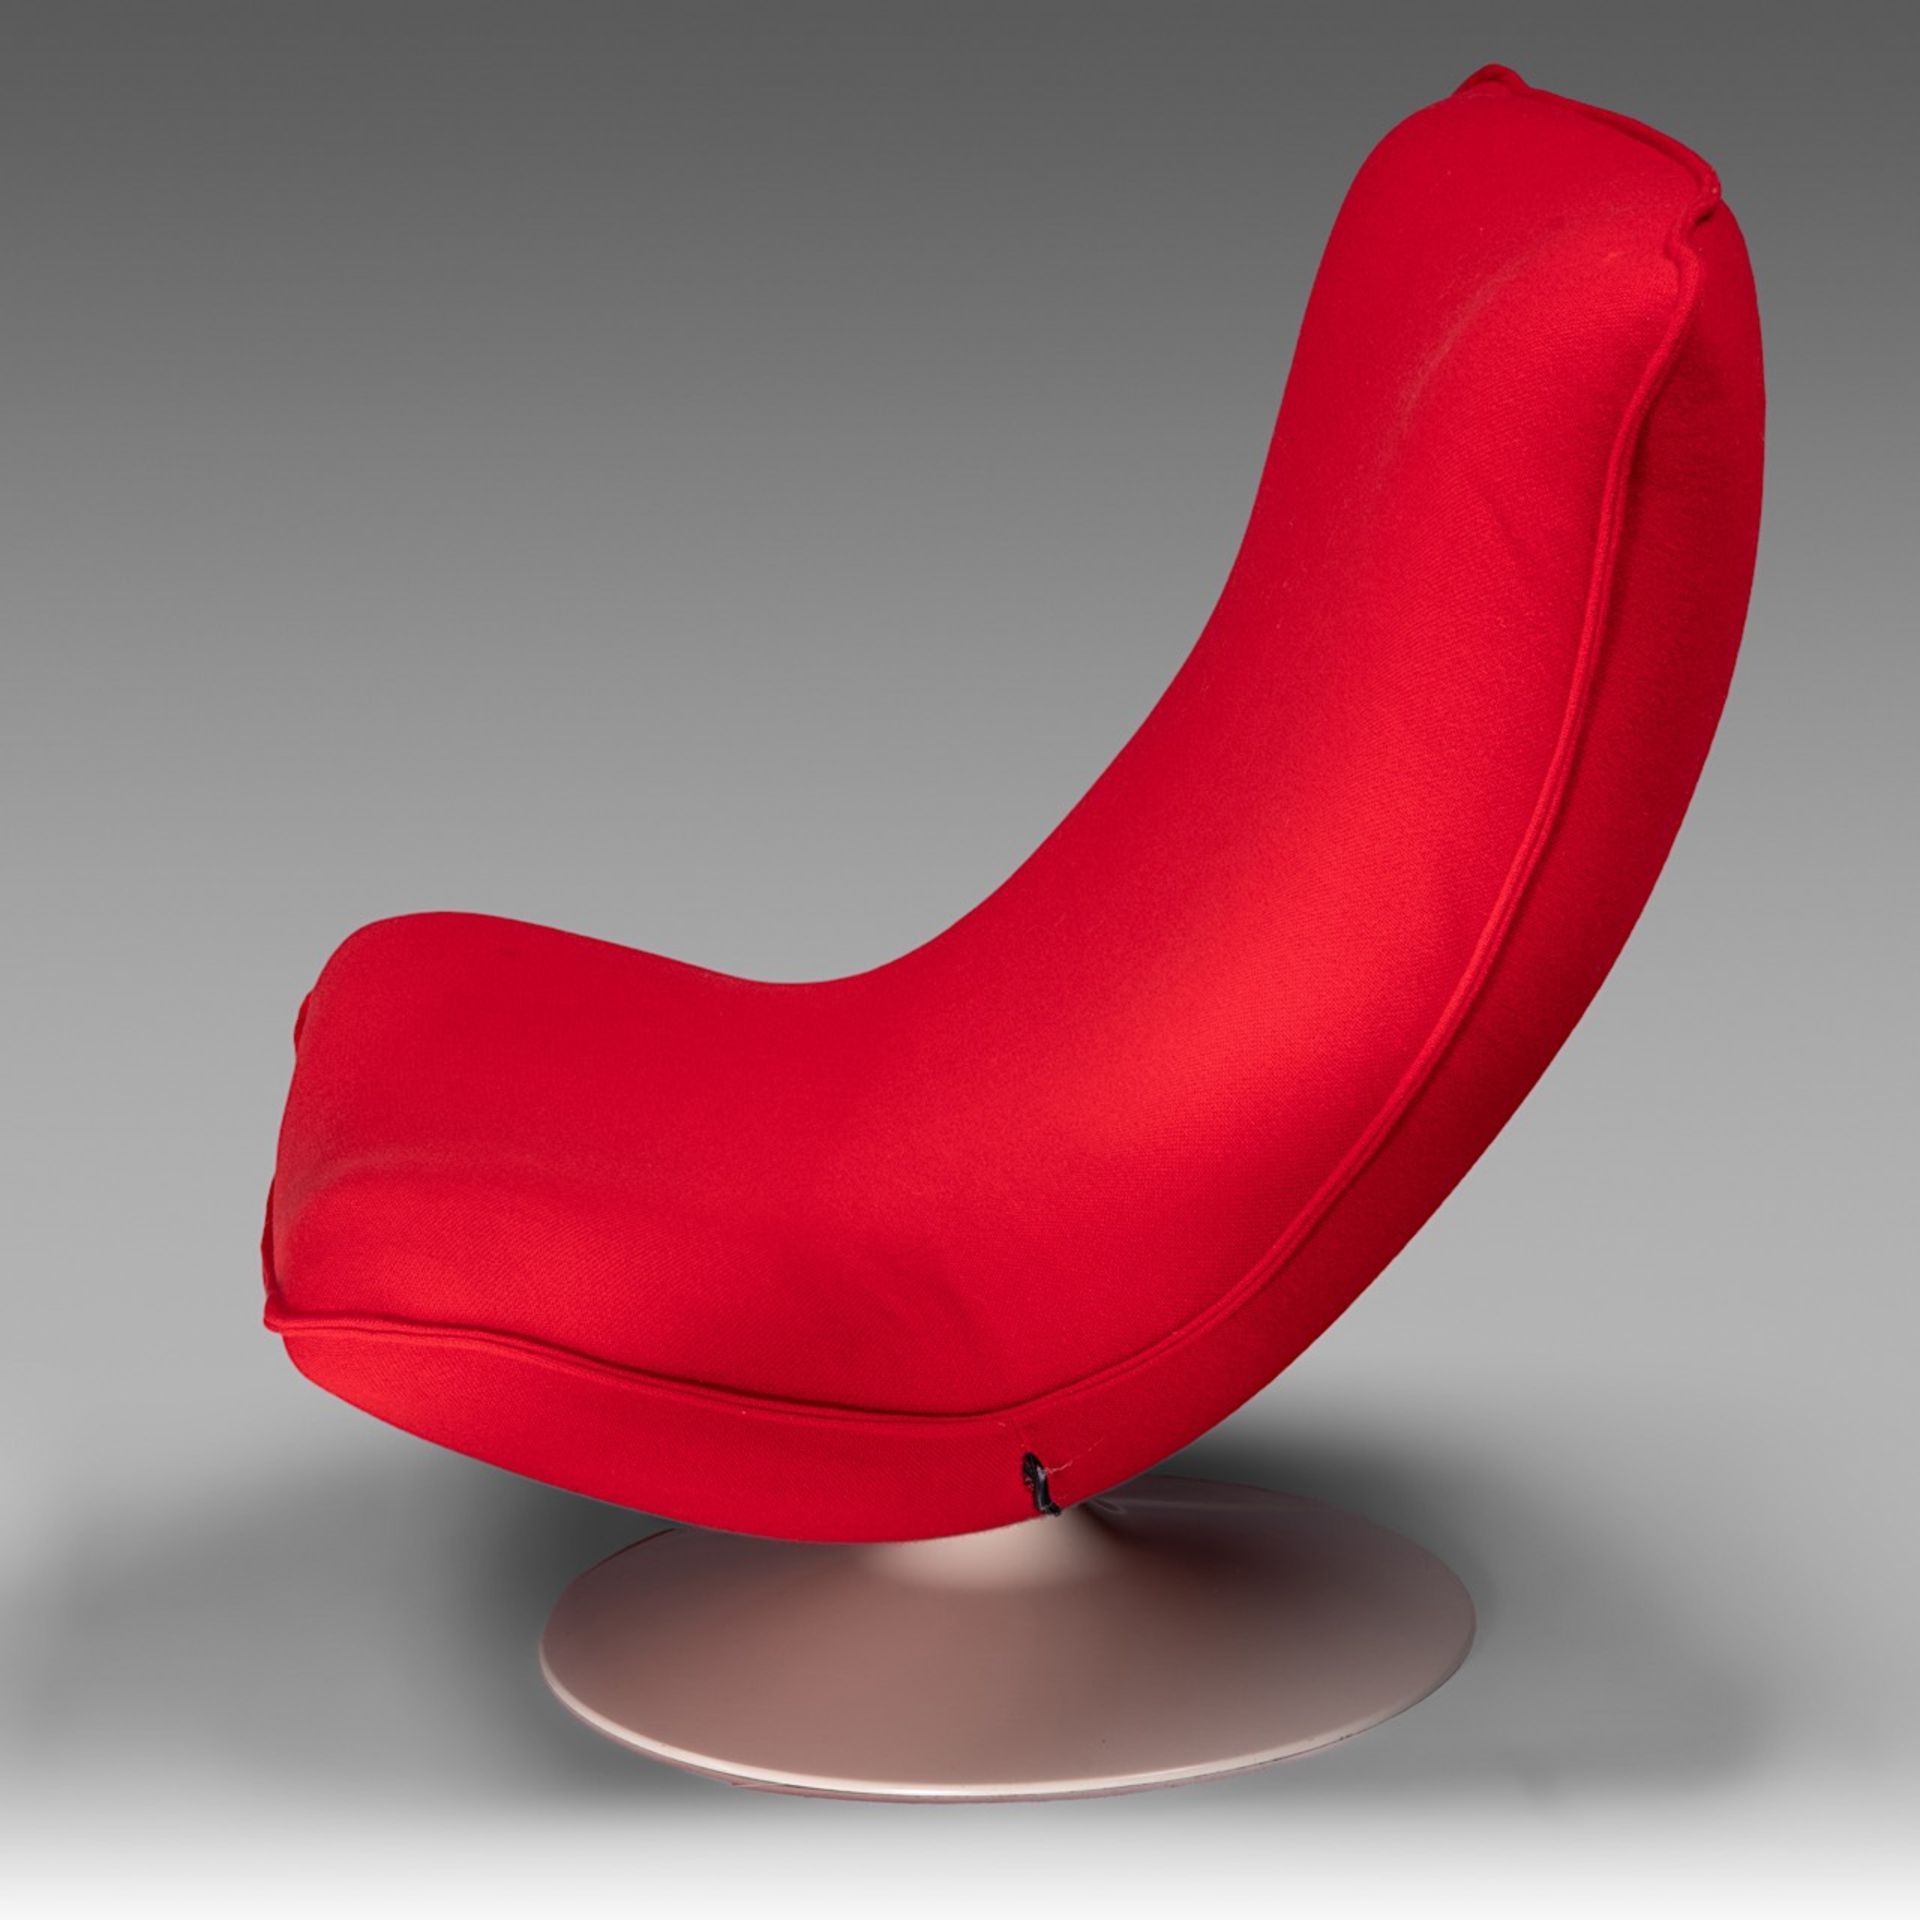 A Vintage F980 easy chair by Geoffrey Harcourt for Artifort (1970), H 82 - W 75 cm - Image 3 of 8